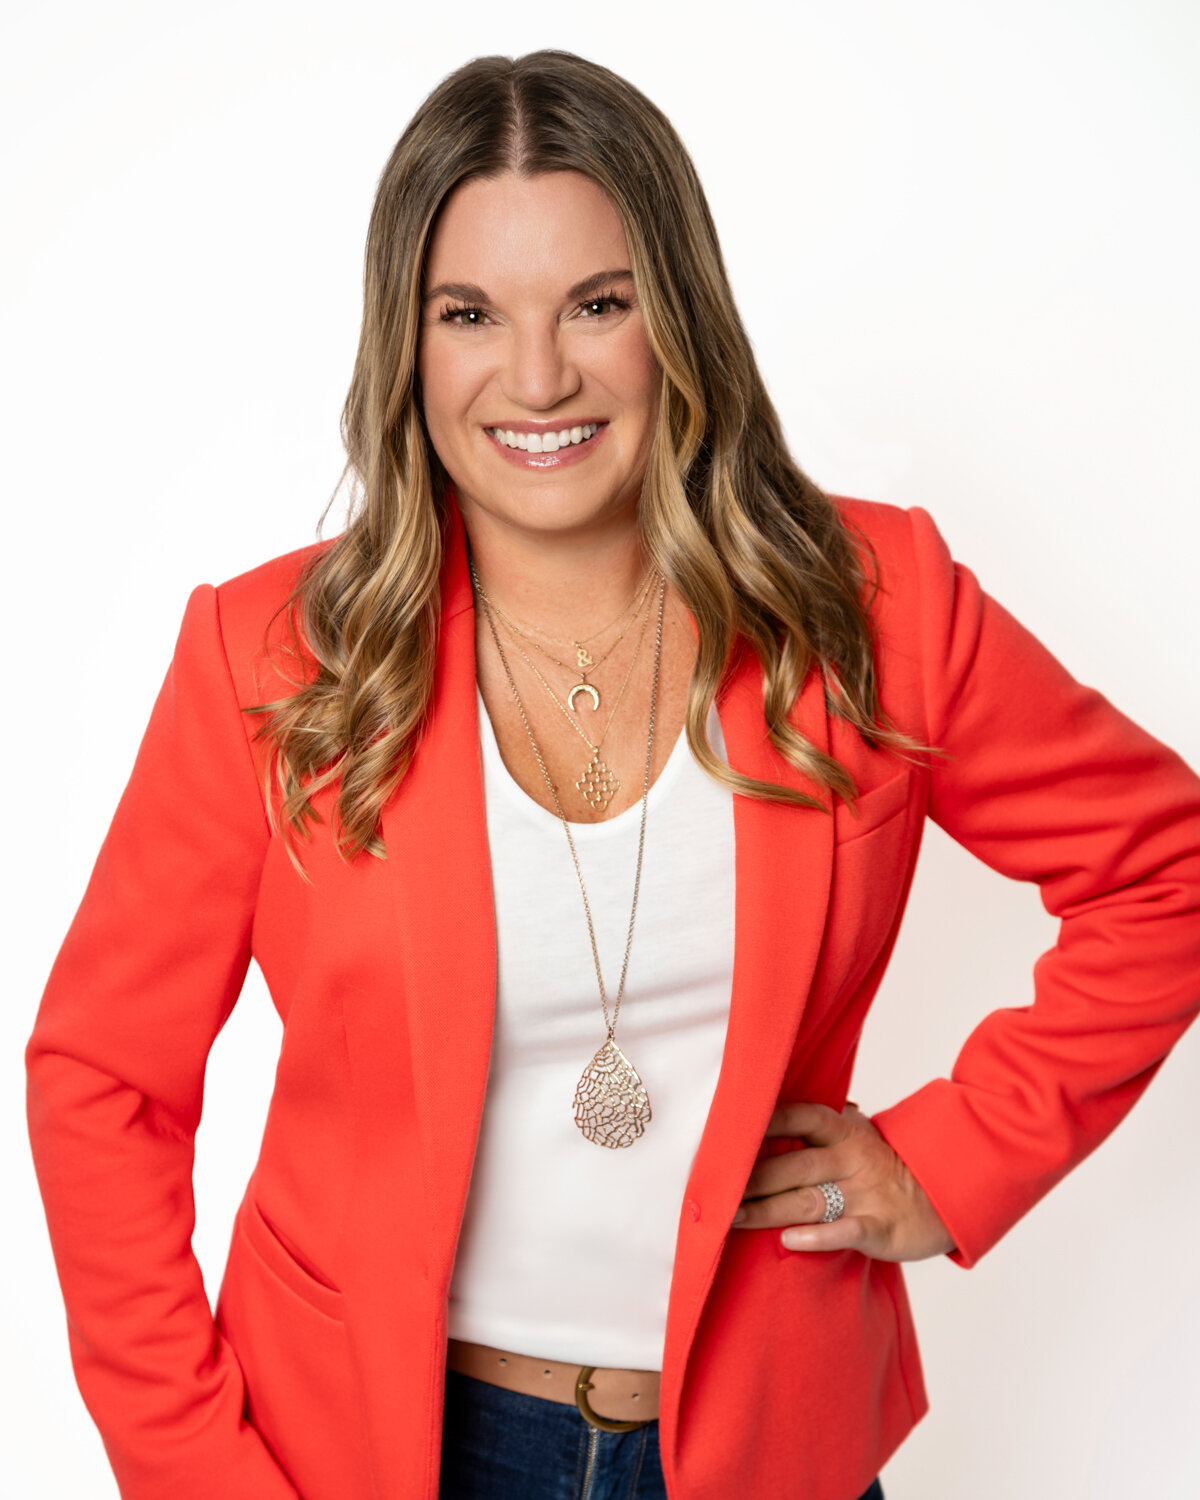 Meet Melisa! 📸 She's embracing her new global role at work and wanted headshots that perfectly capture her vibrant energy and style. Notice the bold colors that mirror her dynamic approach to her work! Those beautiful necklaces? They're her go-to st